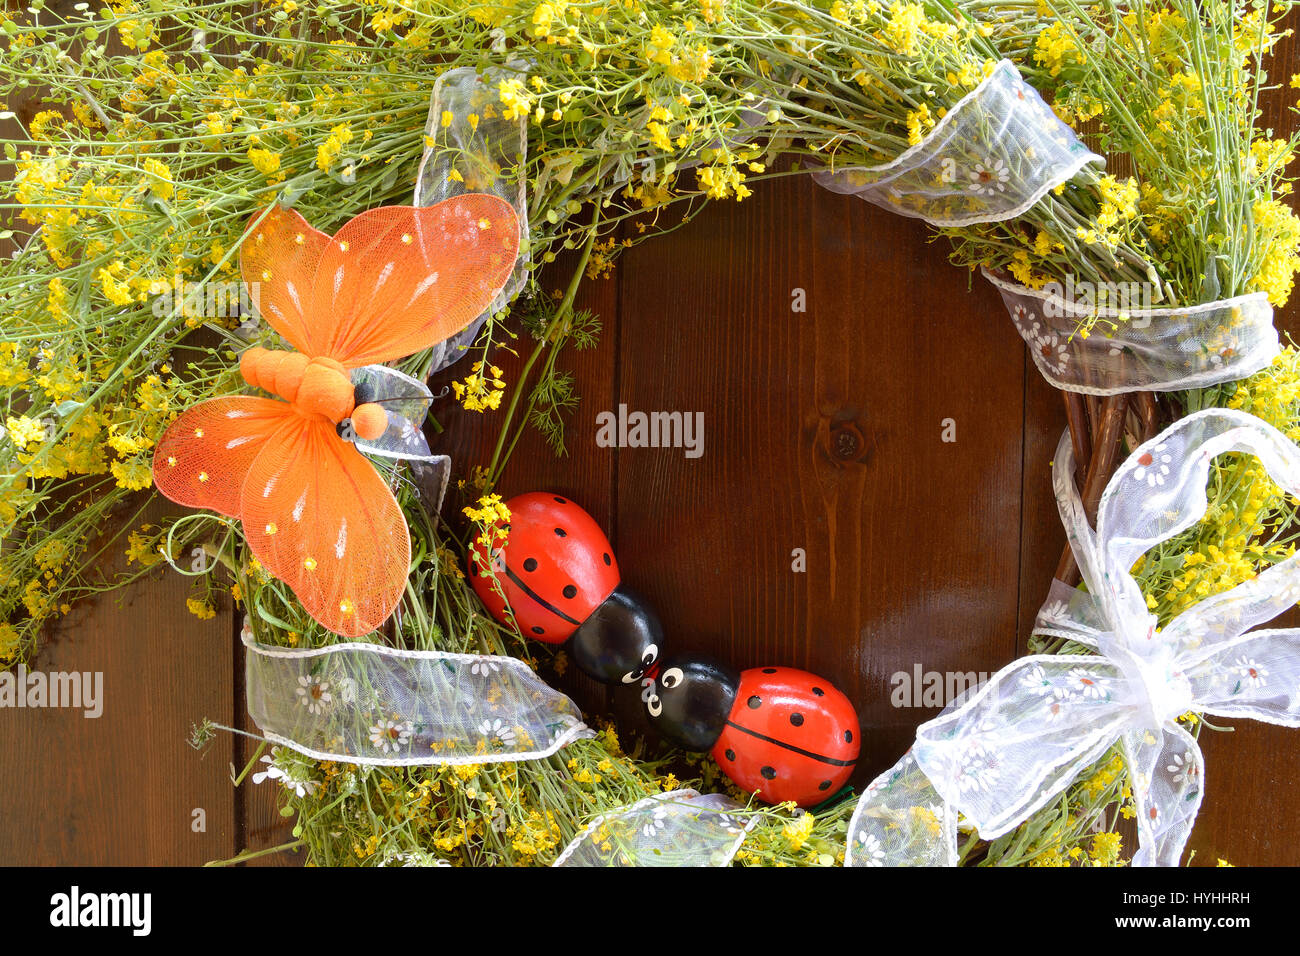 Wreath of yellow wild flowers and decorated with an orange butterfly and two wooden ladybugs on wooden background Stock Photo